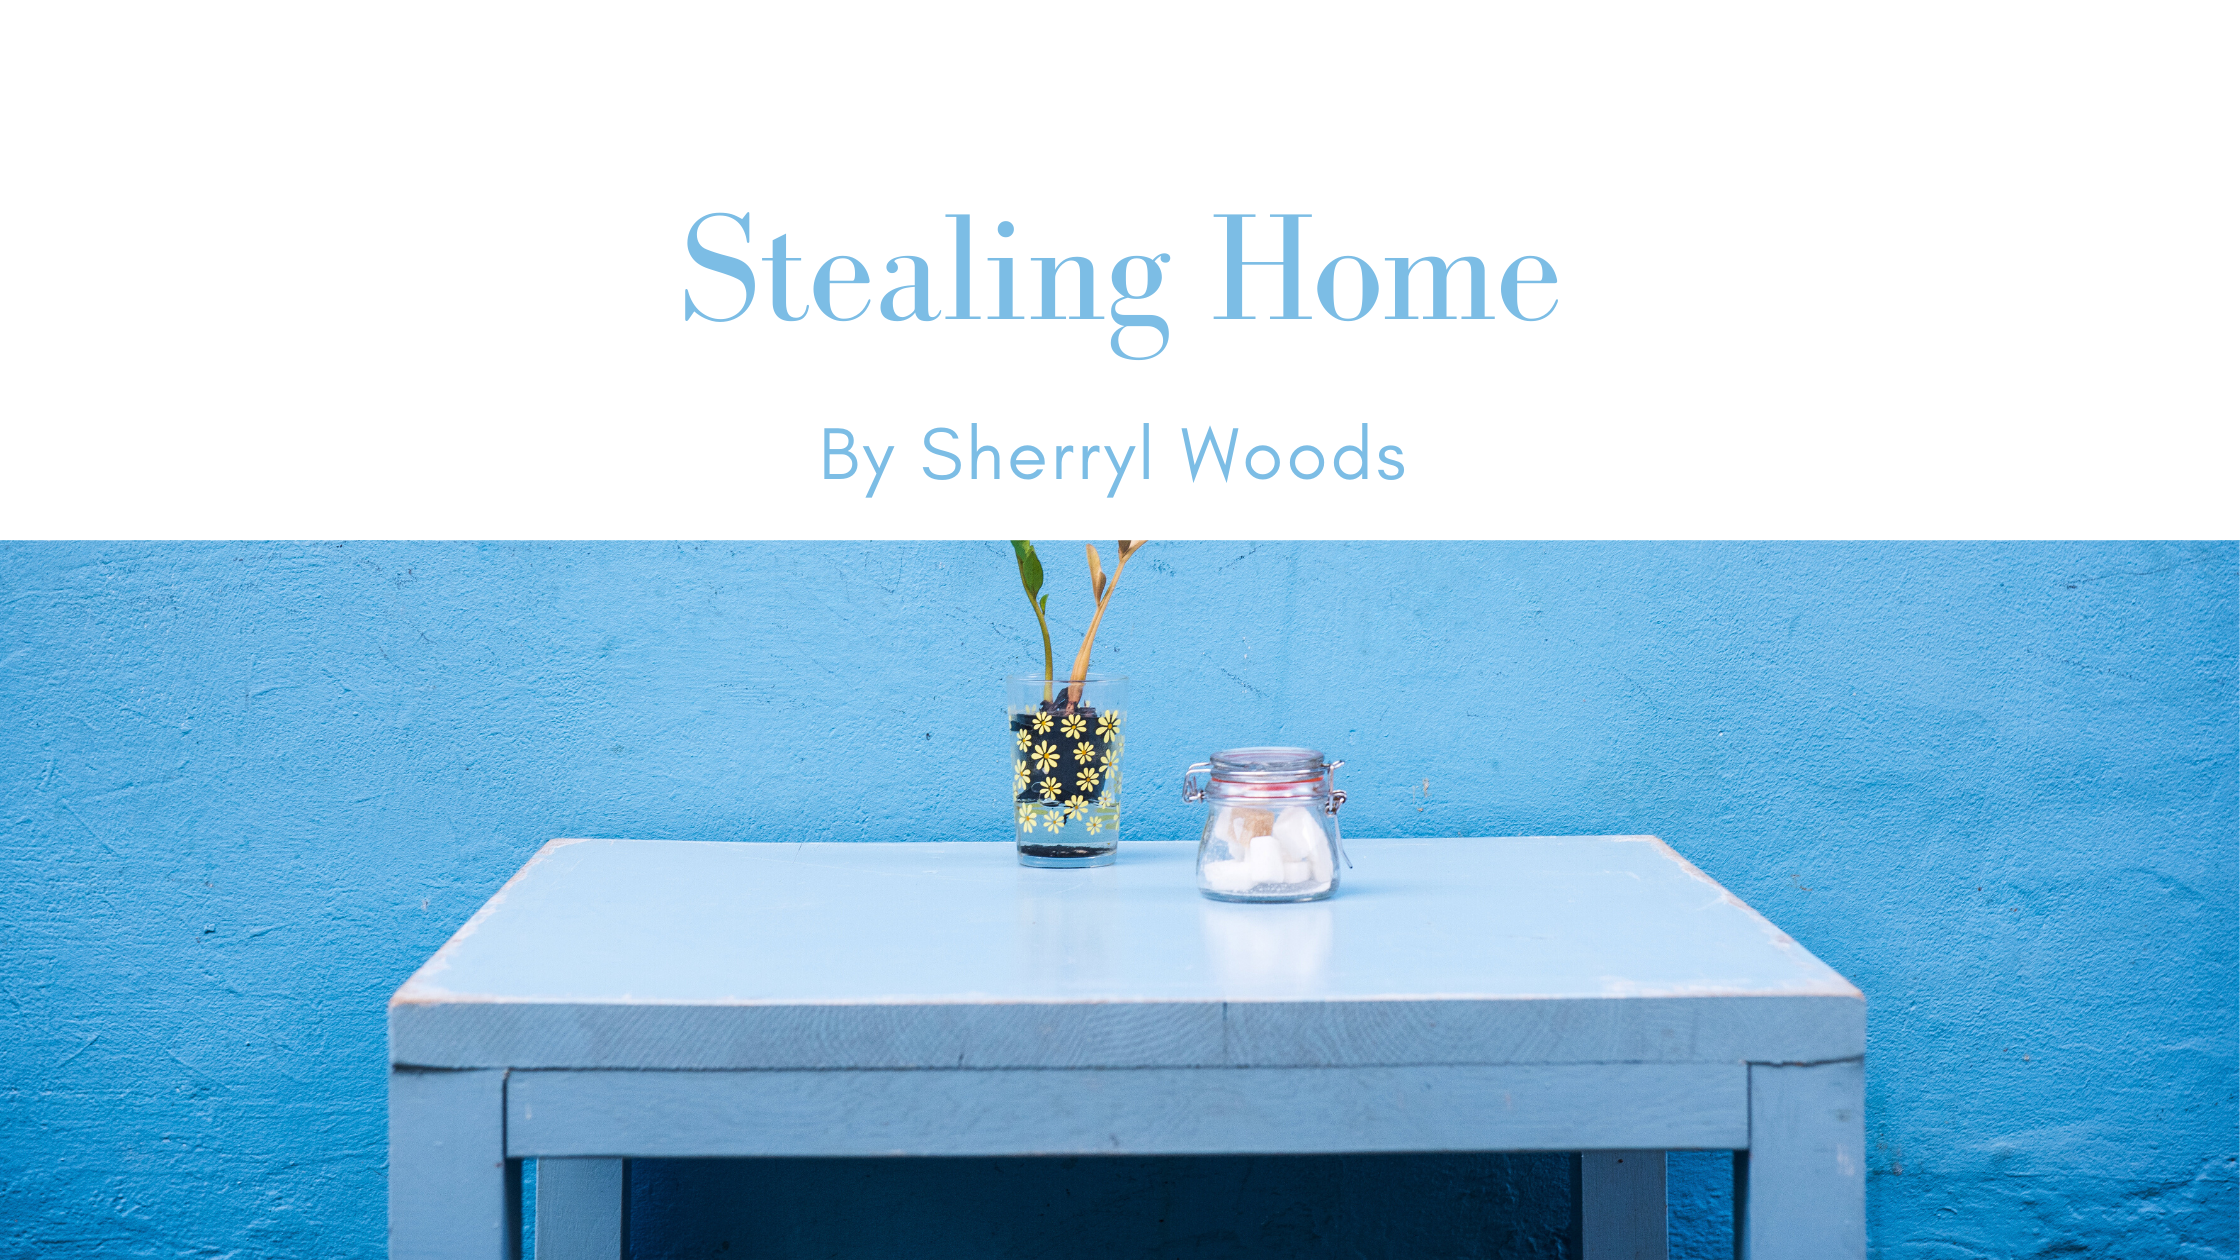 Book Review: Stealing Home by Sherryl Woods